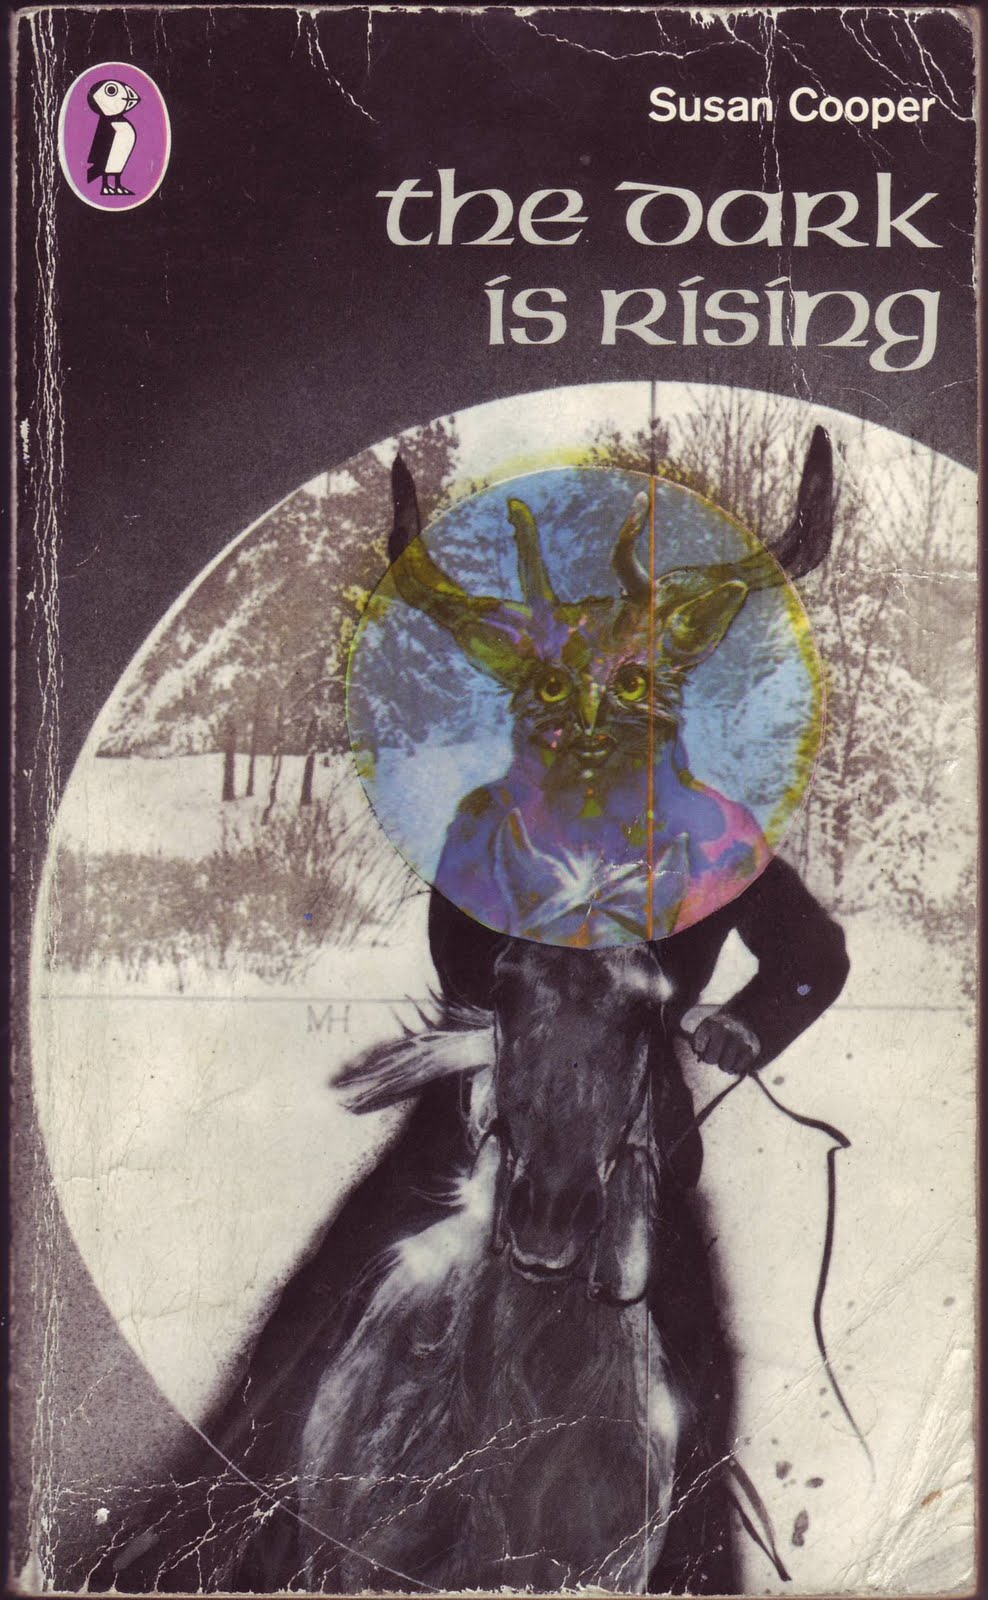 Cover of the book 'The Dark is Rising'